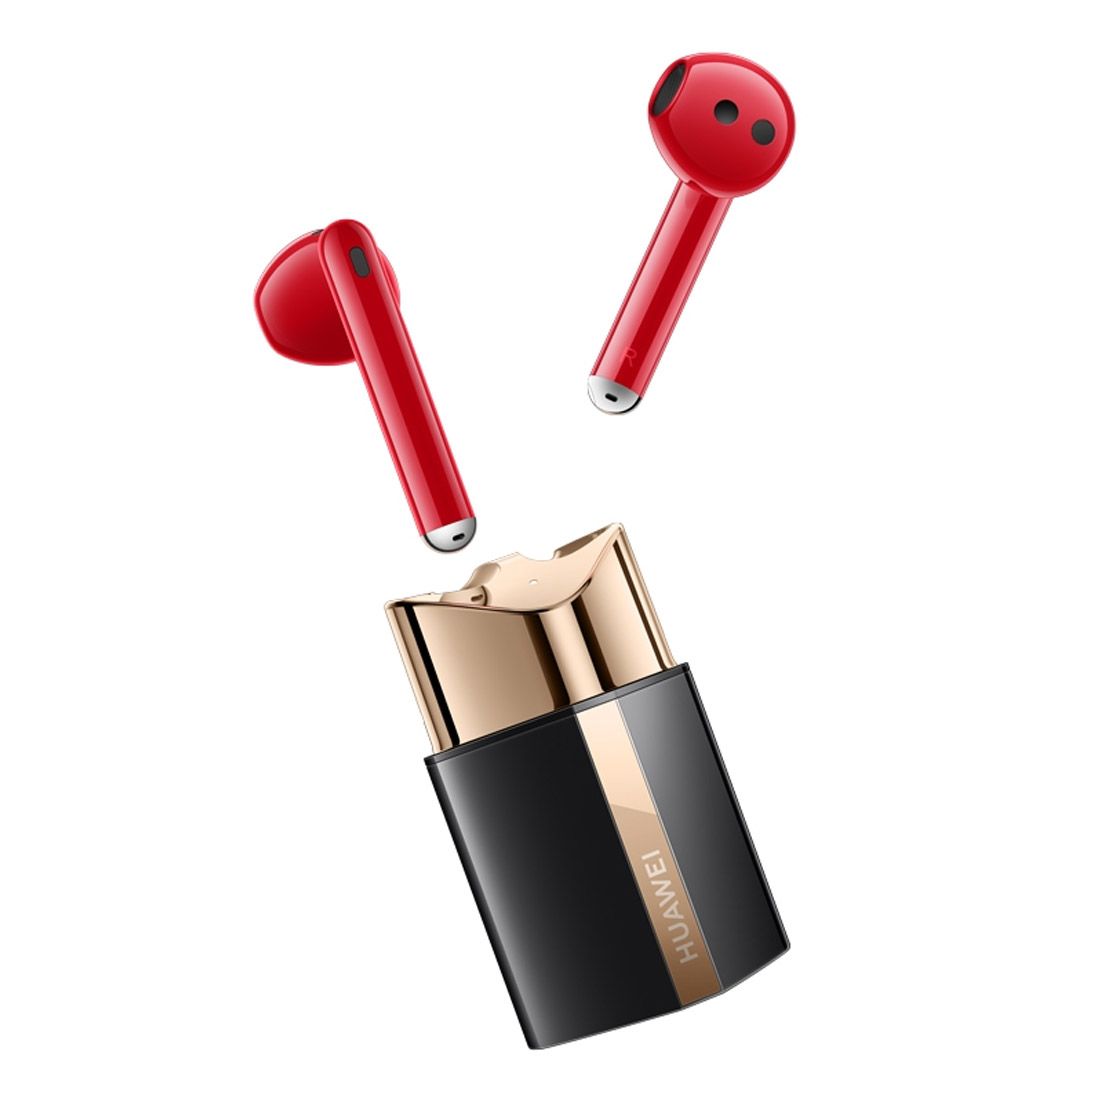 Huawei FreeBuds Lipstick Red Limited Edition Wireless Bluetooth with Active Noise Cancellation 2.0 Huawei